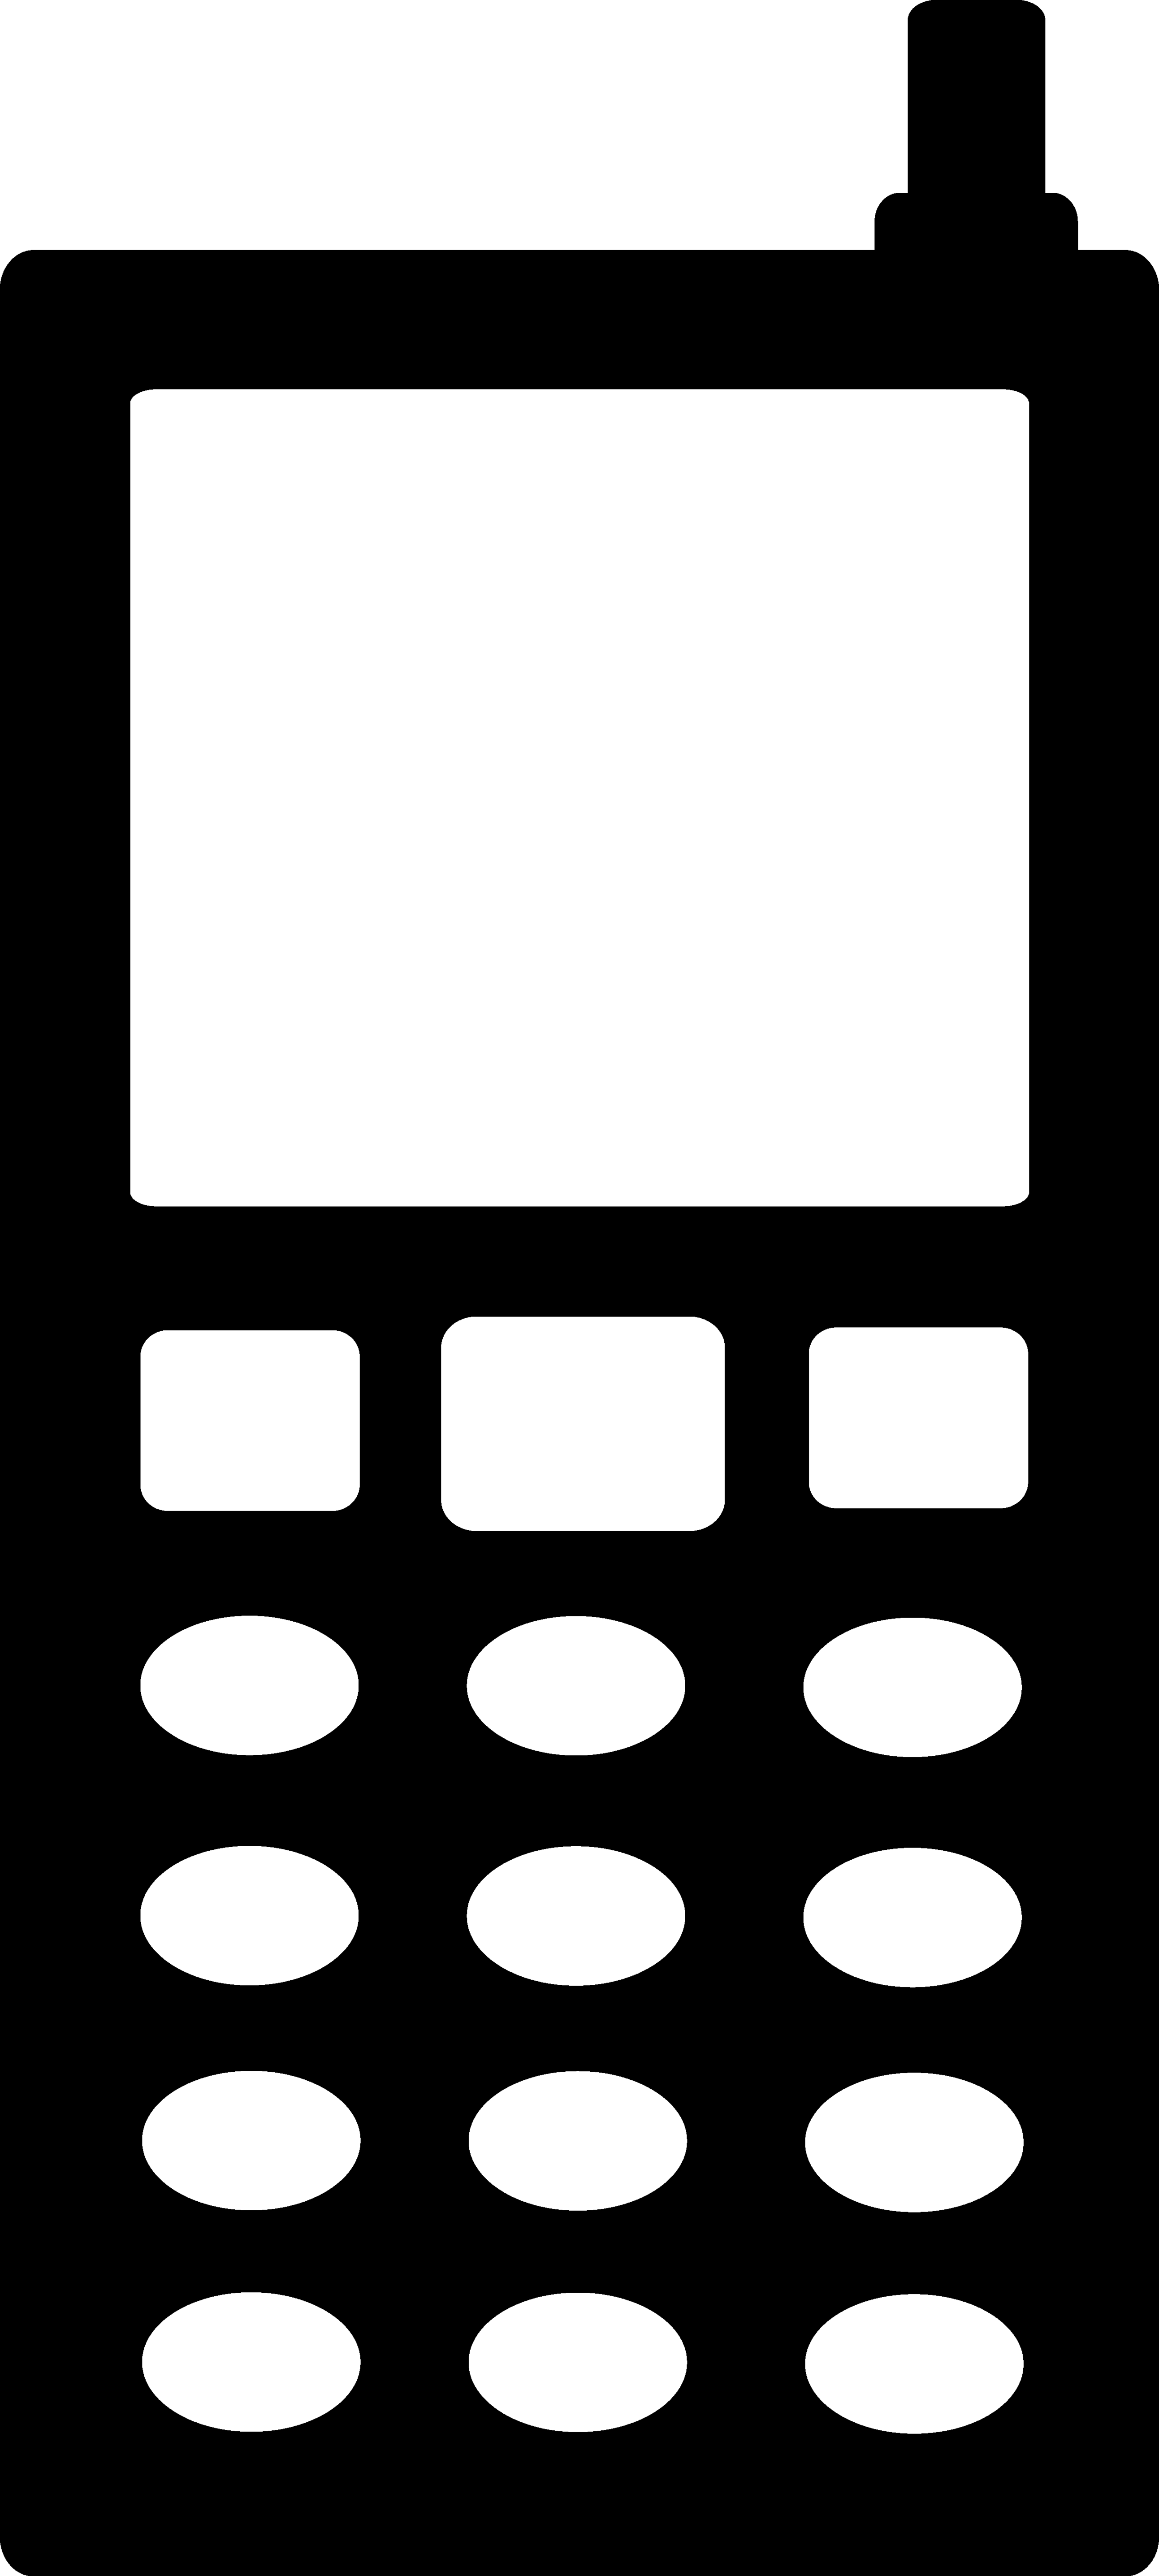 Mobile phone clipart black and white